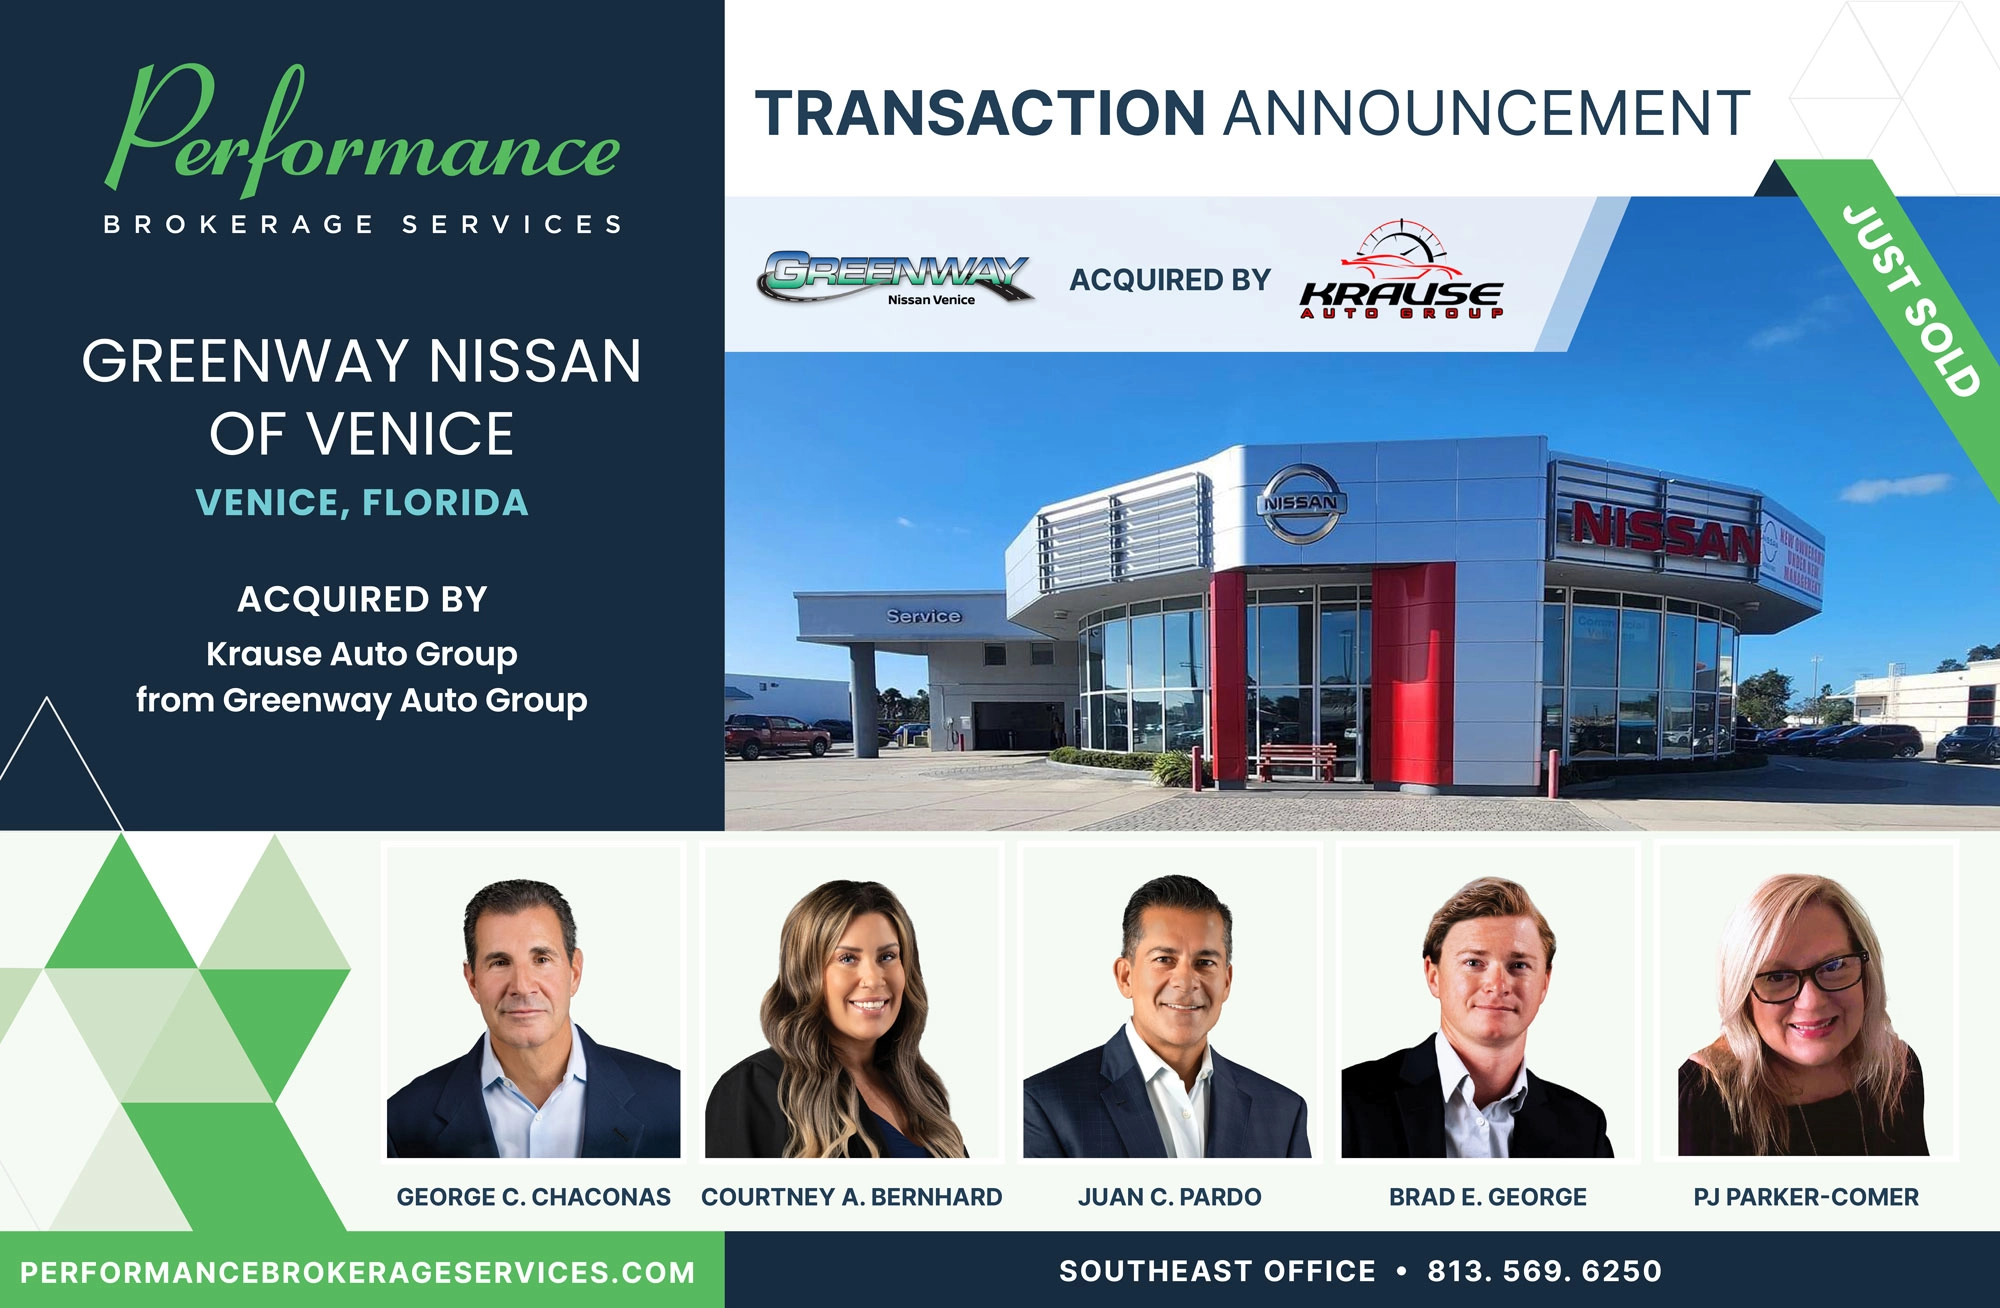 Greenway-nissan-venice-florida-sells-to-krause-auto-group-with-performance-brokerage